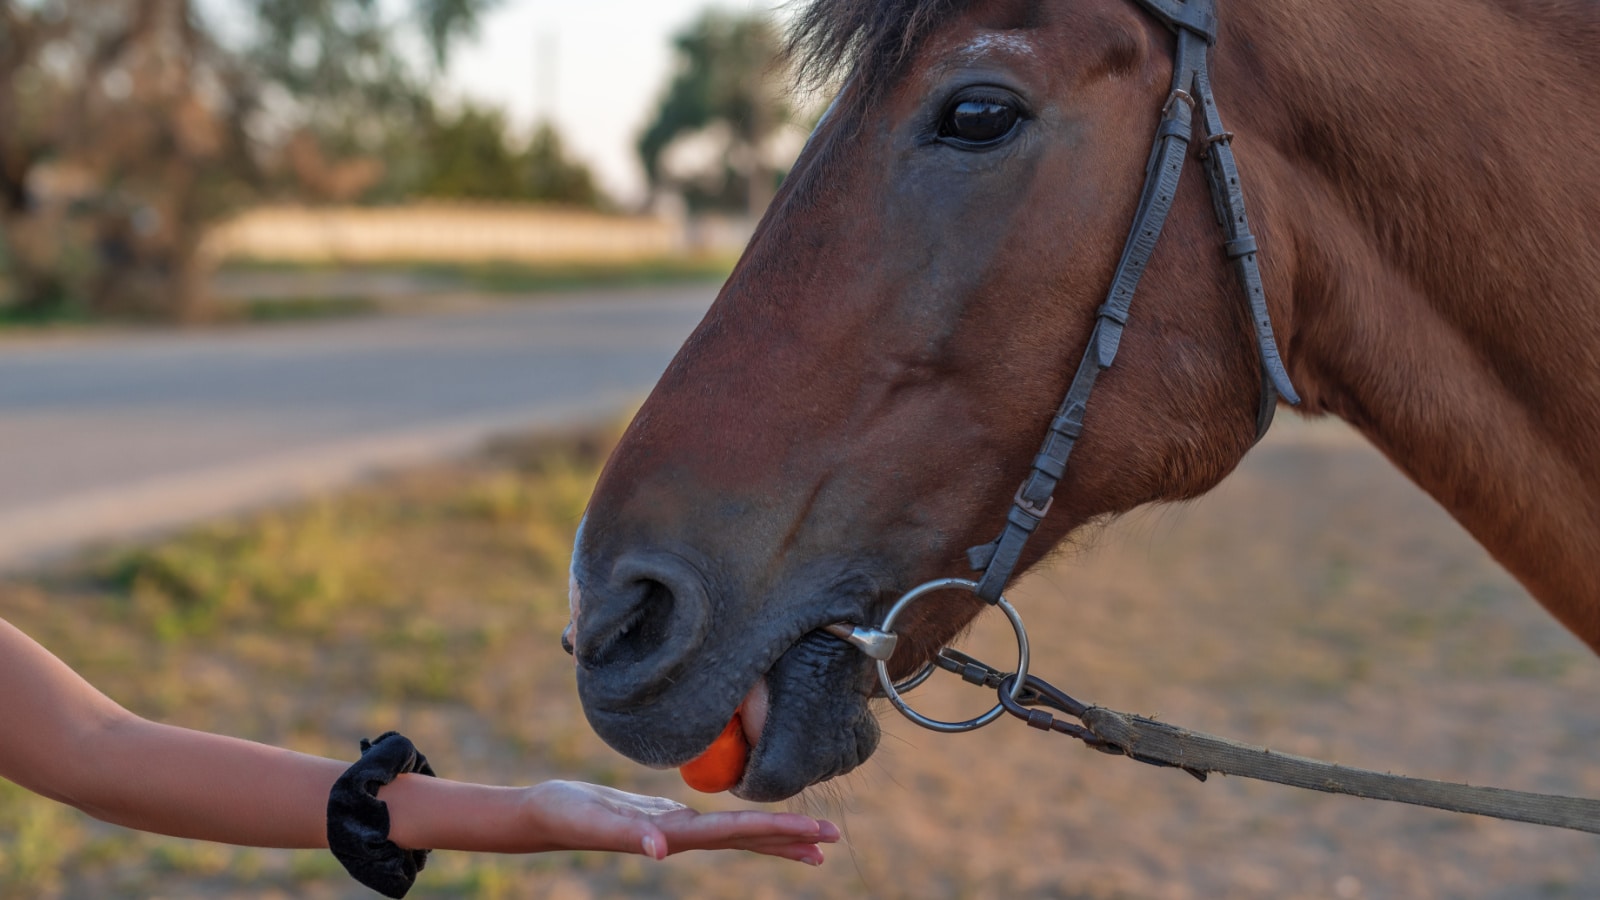 Hand feeding horse carrots, close-up in natural light